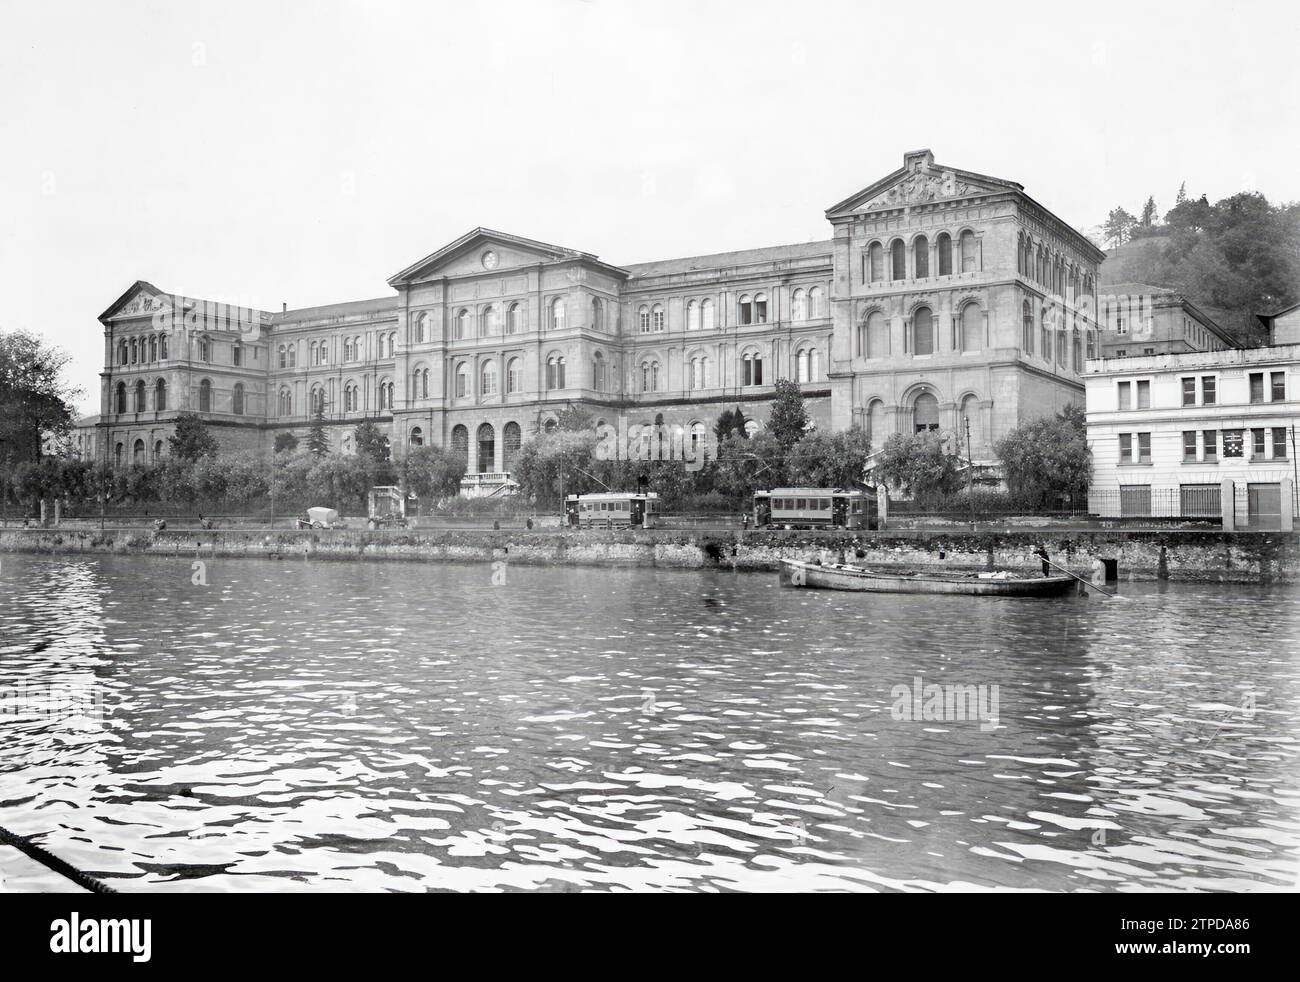 The seizure by the state of the assets of the company of Jesus. The Famous University of Deusto in 1932. Credit: Album / Archivo ABC / Espiga Stock Photo